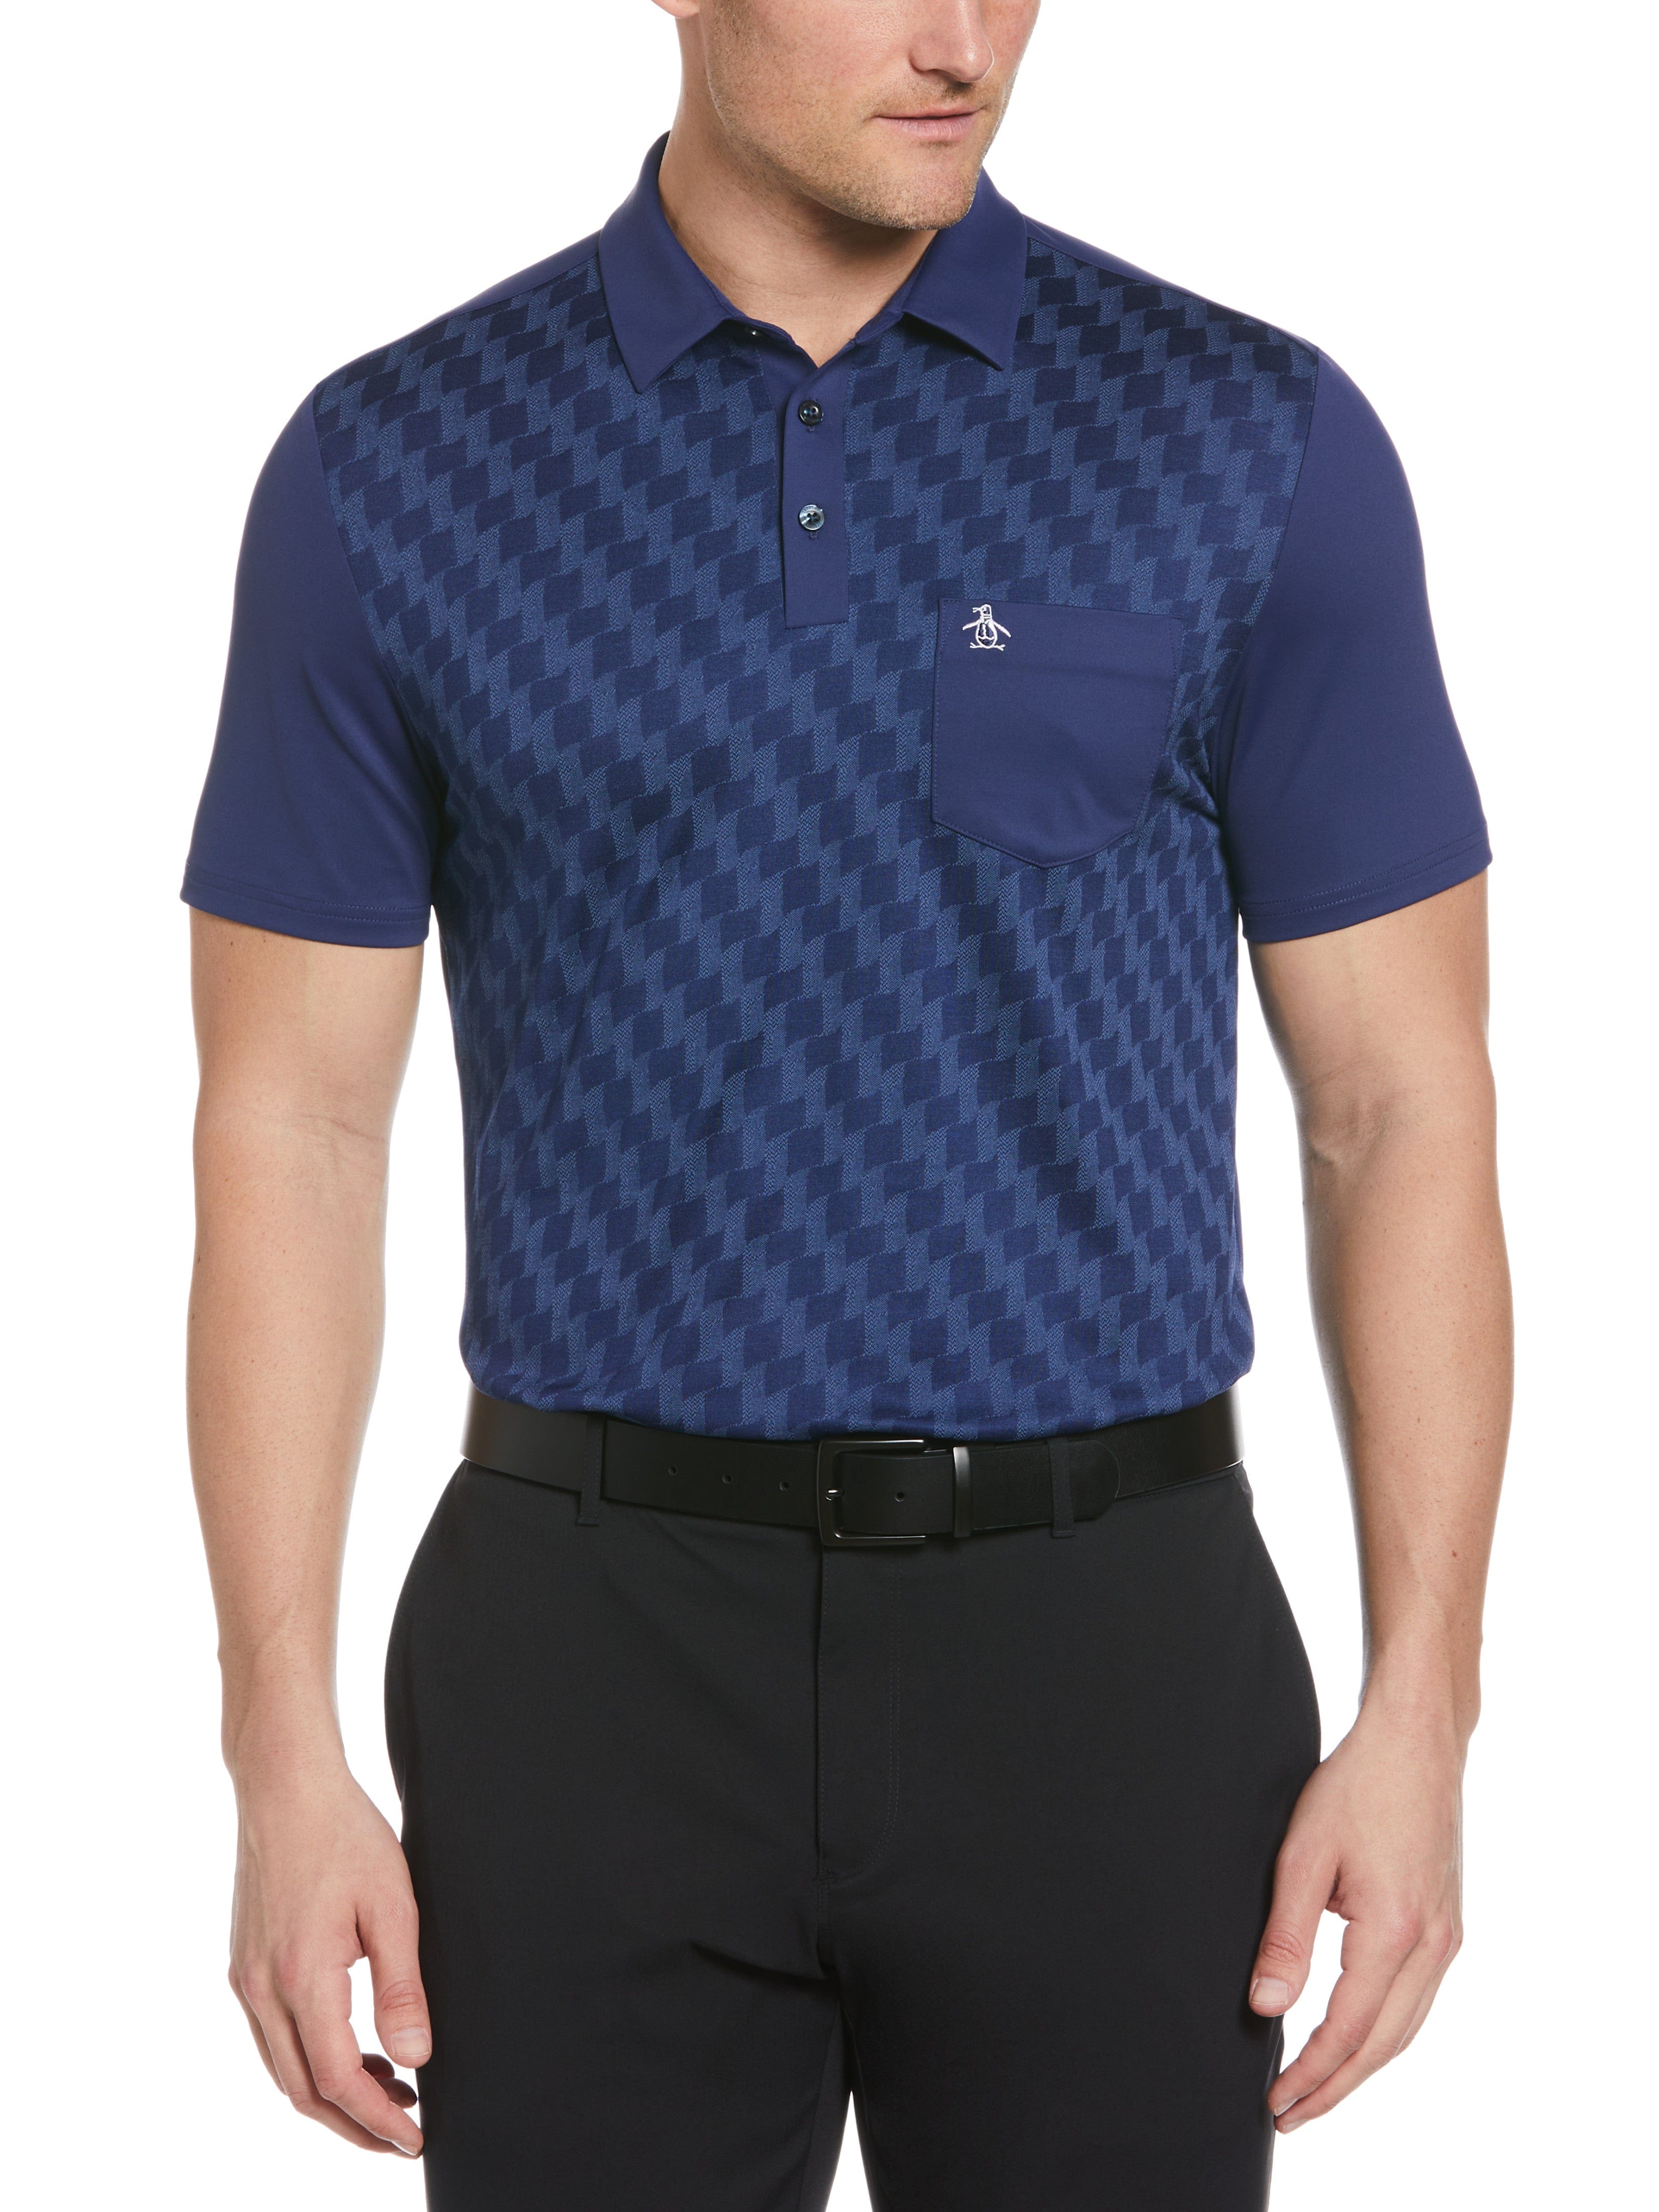 Original Penguin Mens 50s Color Block Print Golf Polo Shirt, Size Large, Astral Night Blue, Polyester/Recycled Polyester/Elastane | Golf Apparel Shop